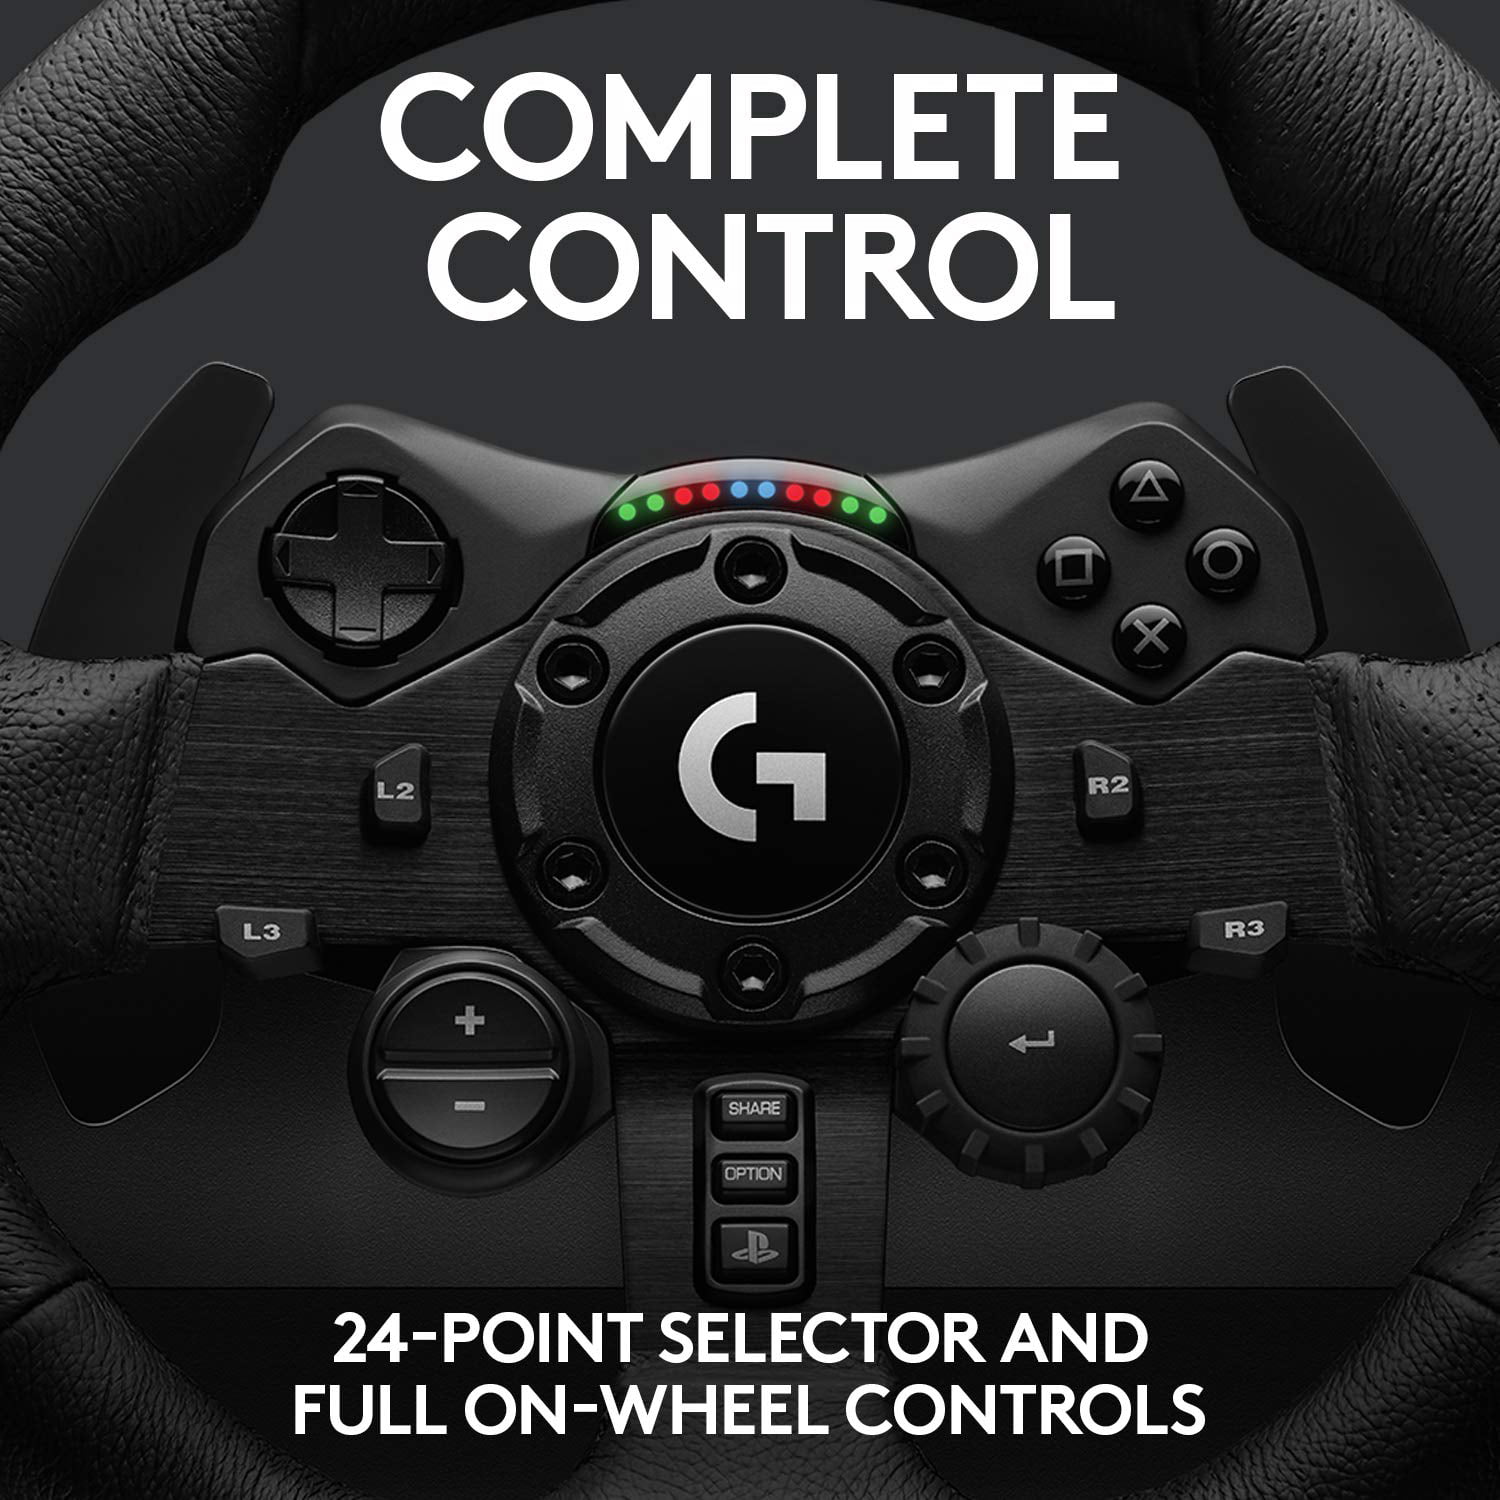 Logitech G923 Driving Force Shifter Dedicated shifter for G923 racing wheel  at Crutchfield